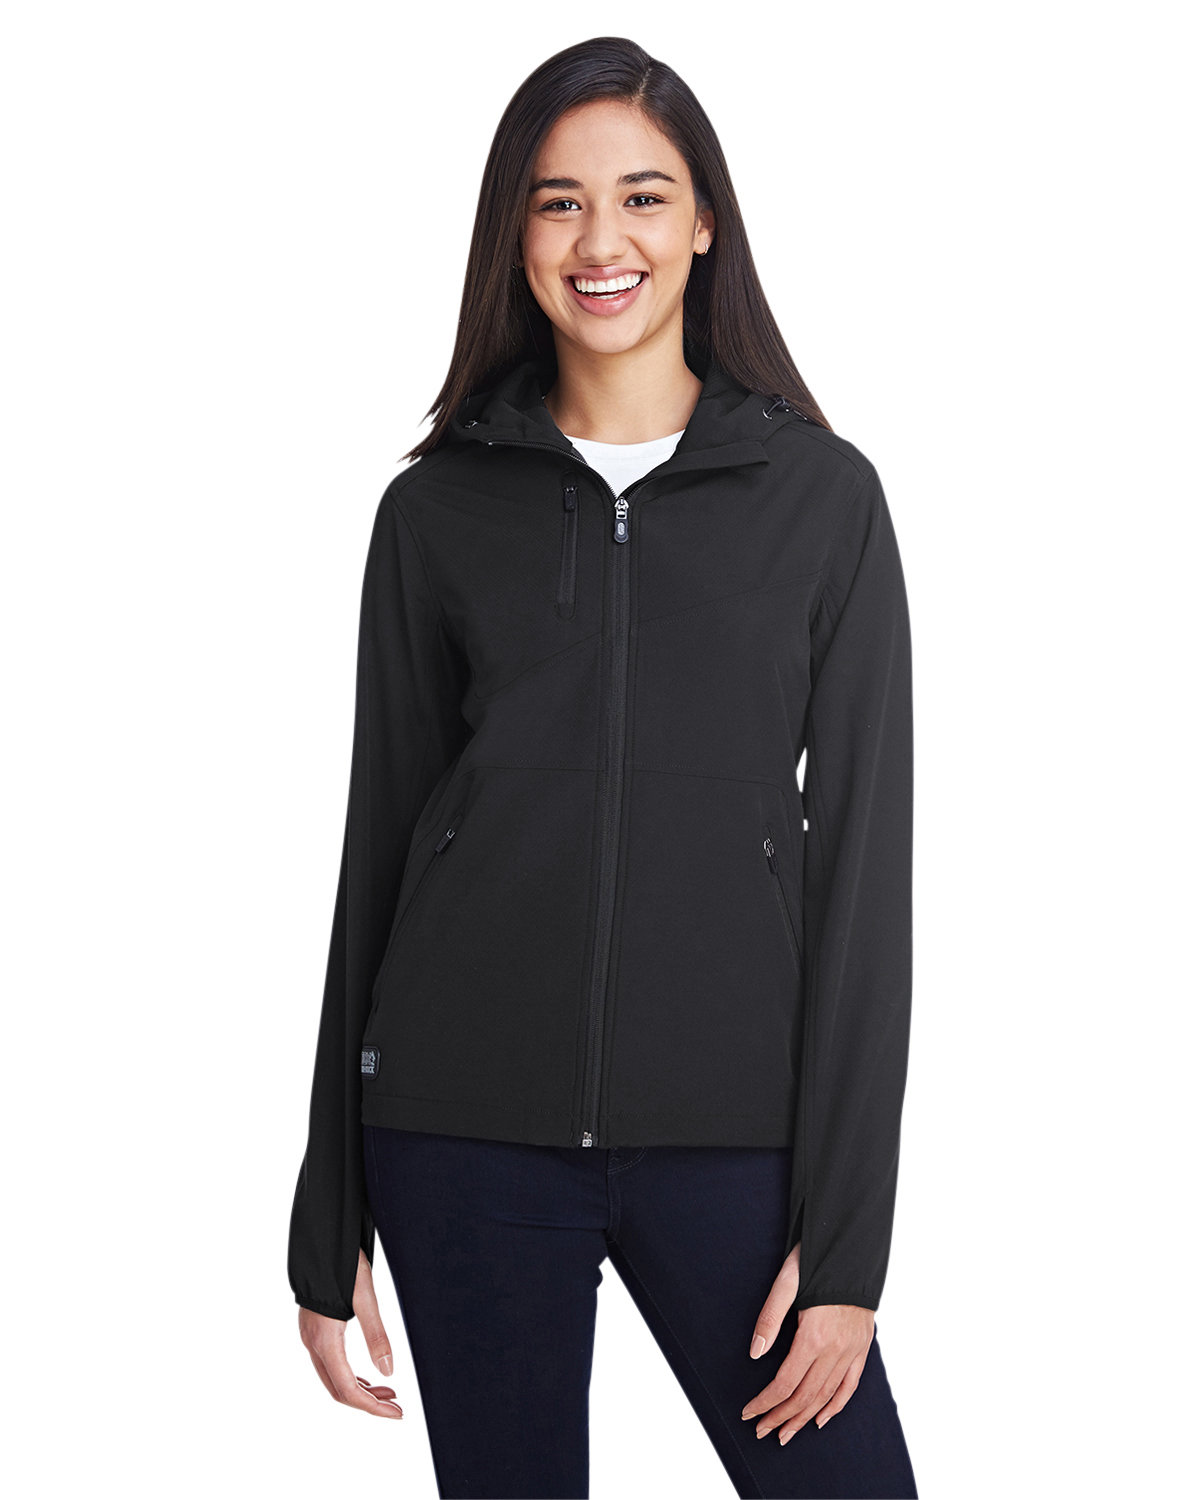 Front view of Ladies’ Ascent Jacket